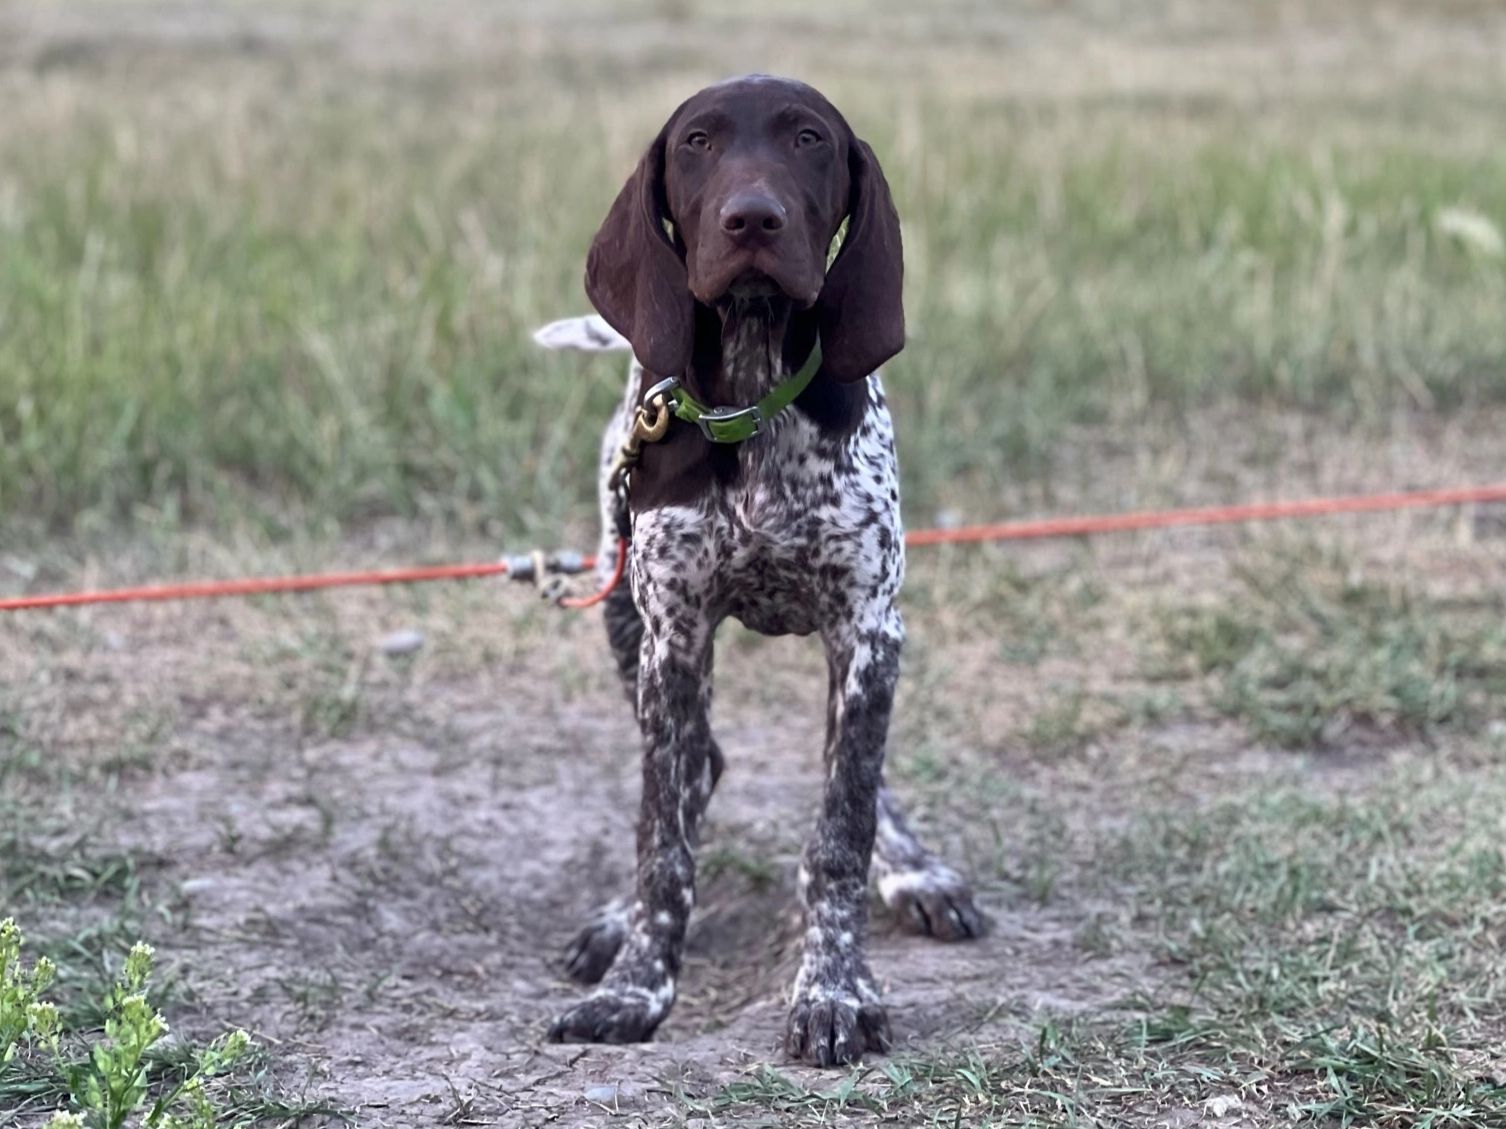 Westrock's puppy Gator waiting patiently for his bird dog training to start